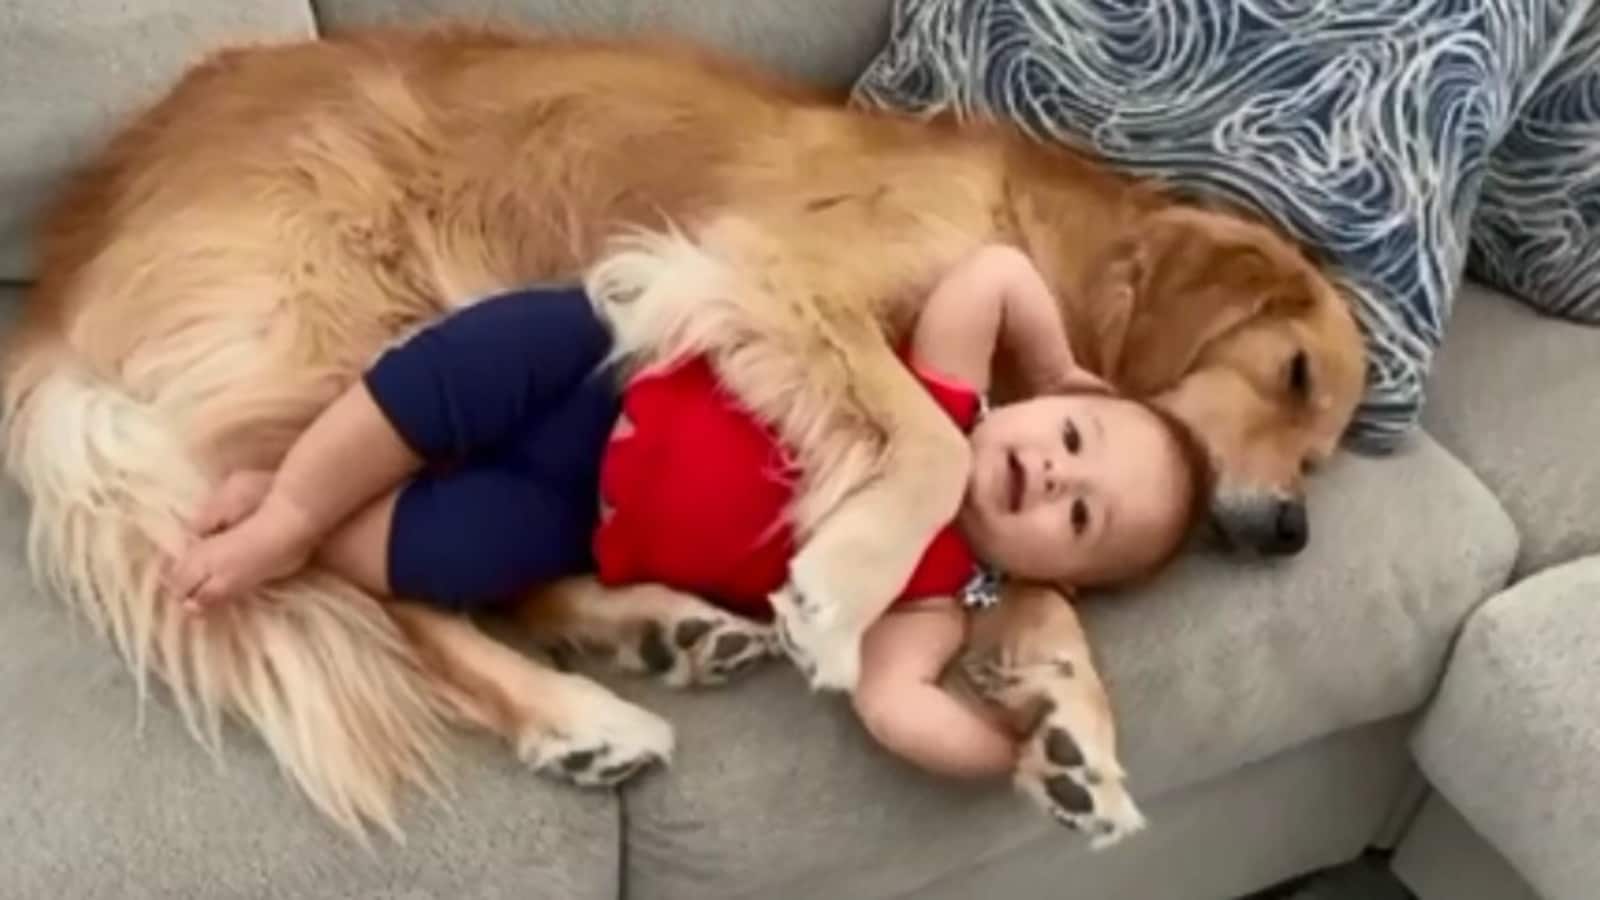 Kid_and_dog_cuddling_with_each_other_1633011576747_1633011579806.jpeg